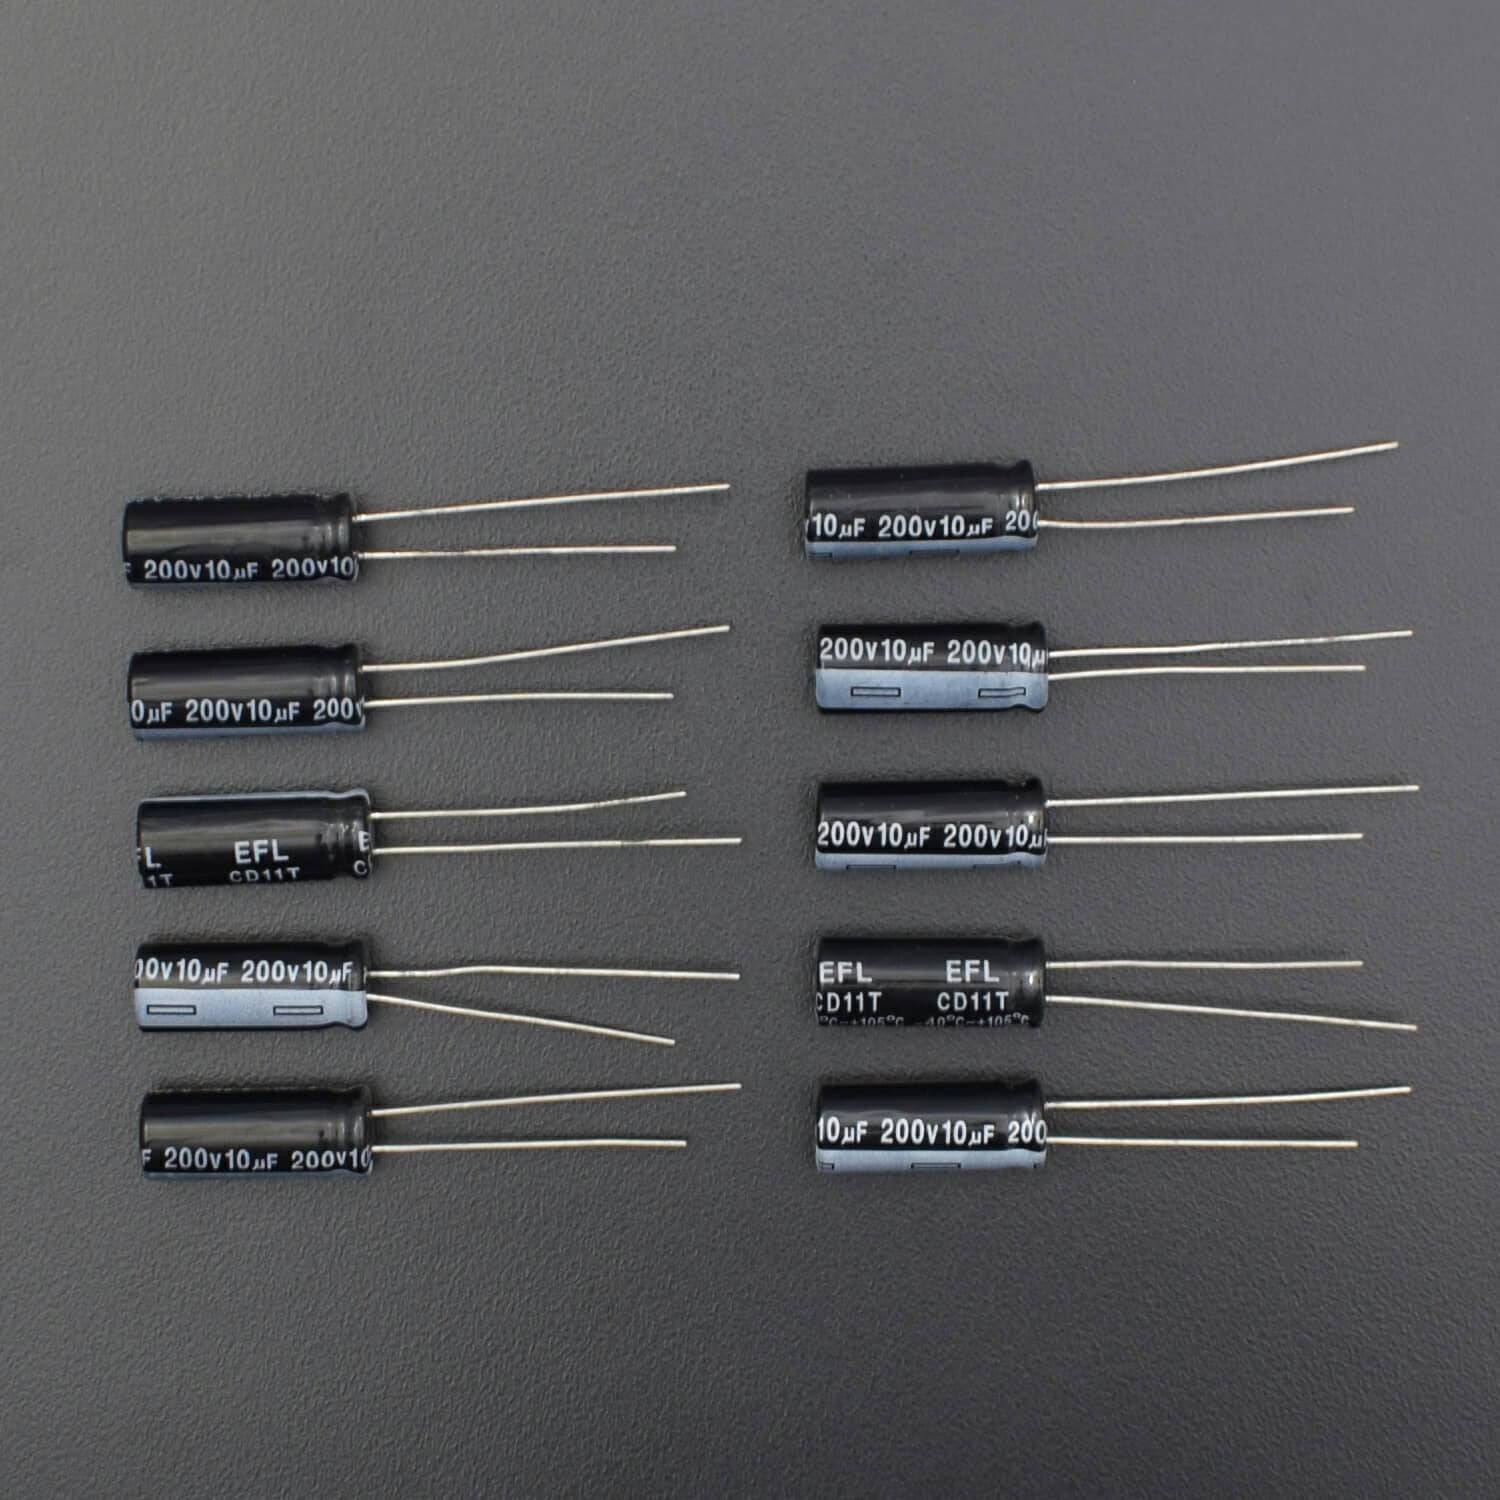 10uF 200V Radial Electrolytic Capacitor-Pack of 5 - RS2029 - REES52